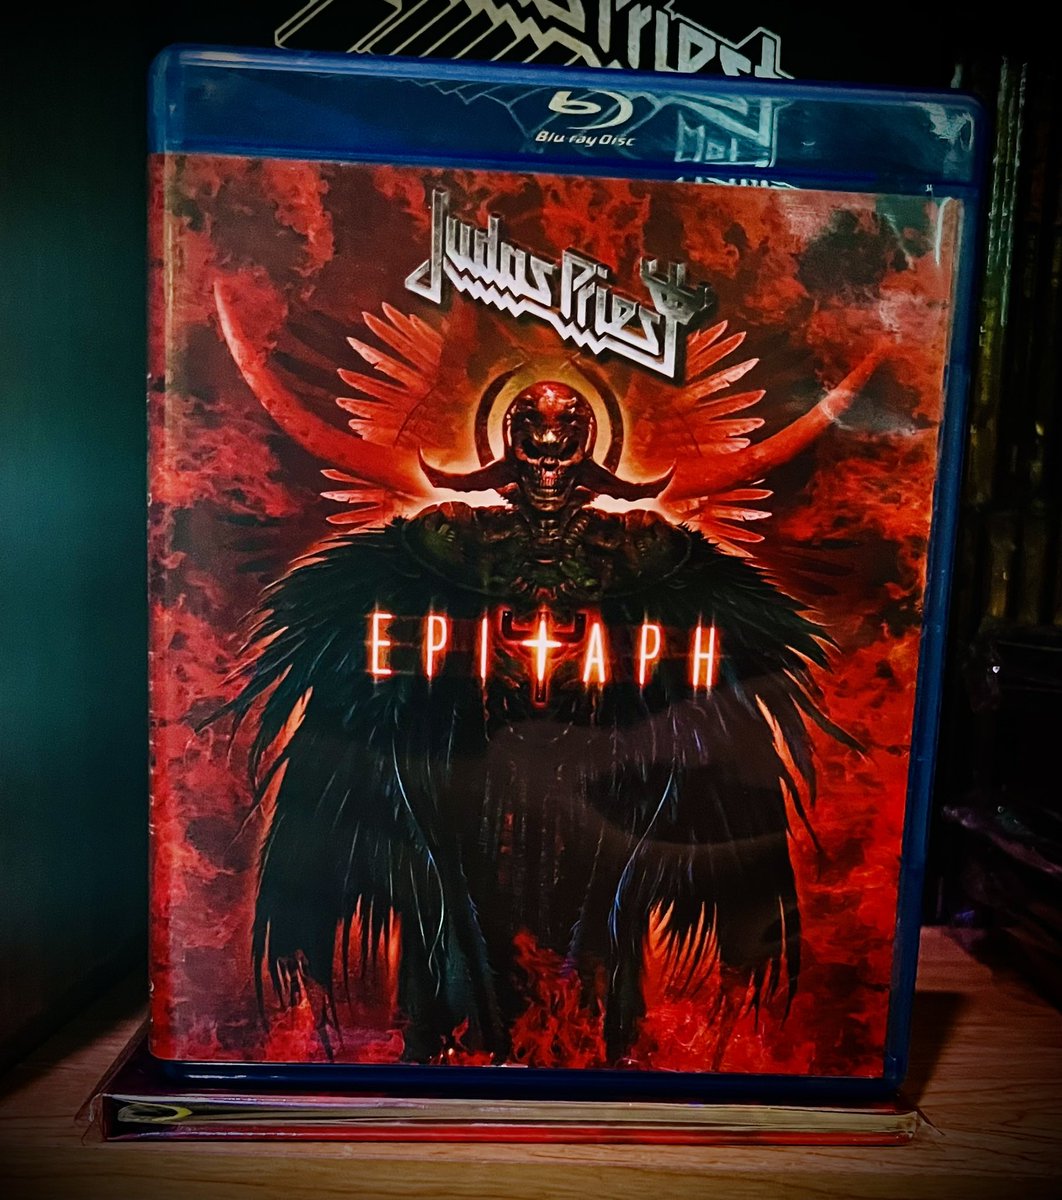 I am really starting to get in to the Priest spirit, ya think!?!
📺🎶🤘😎🤘

#NowWatching #JudasPriest #Epitaph #PhysicalMusic